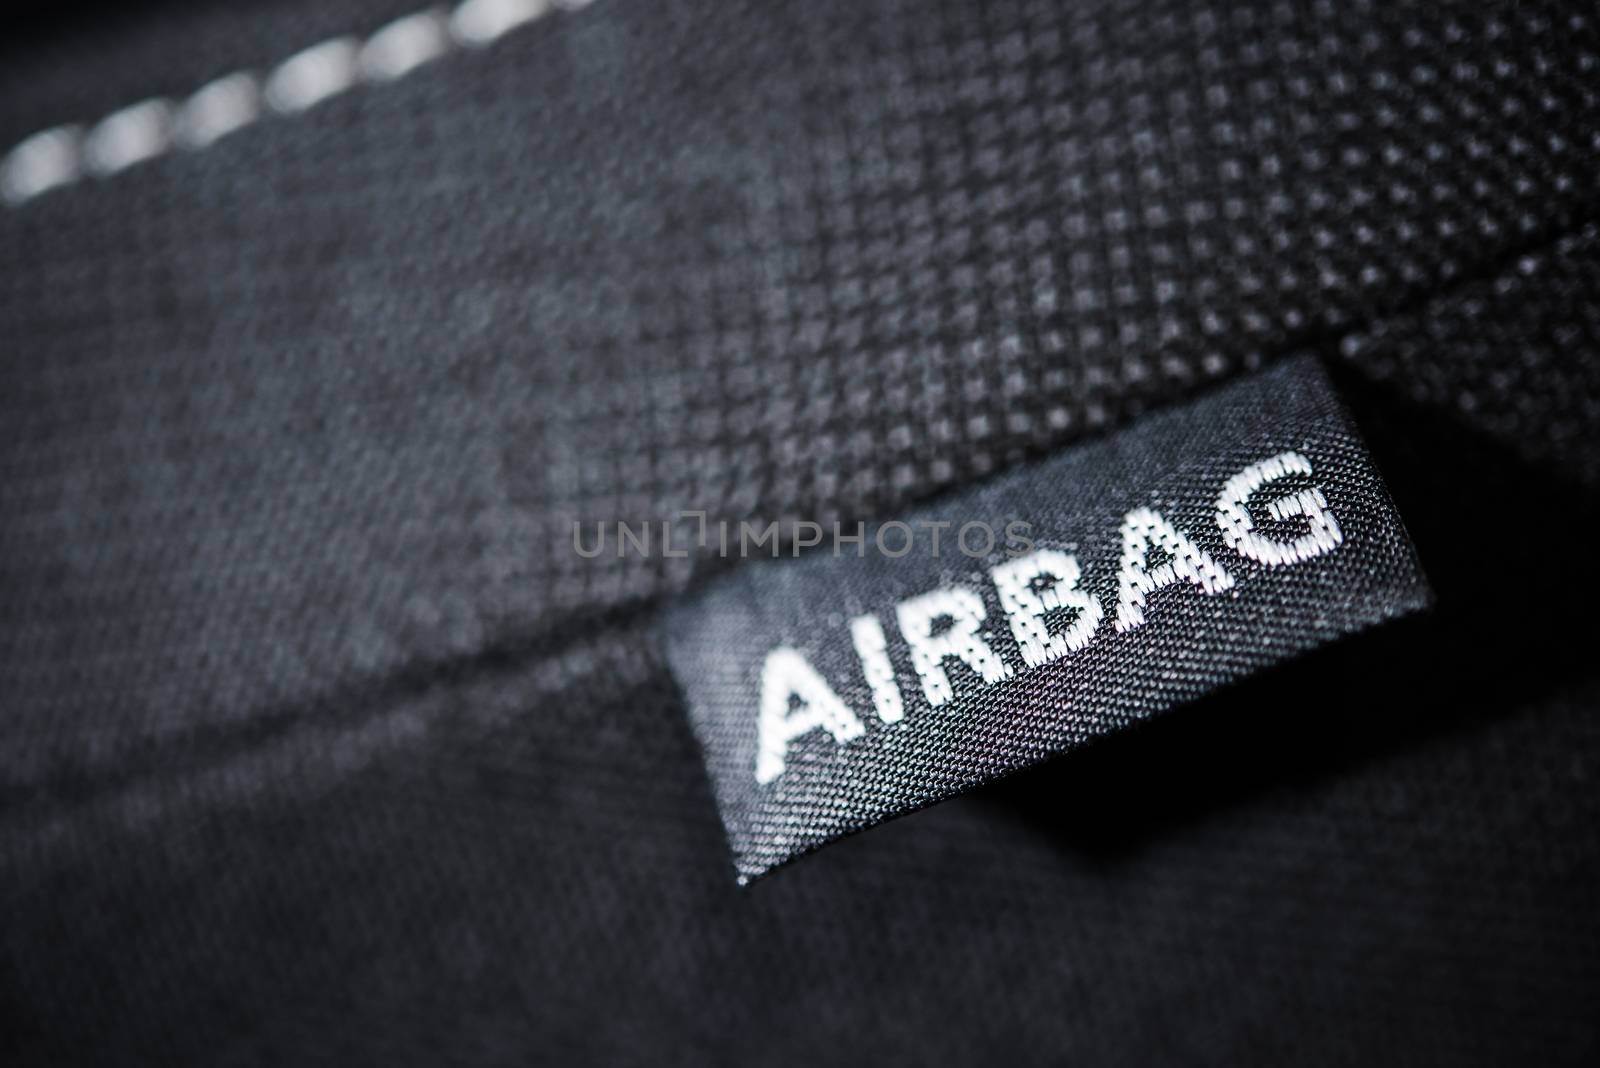 Side Car Airbag Tag. Modern Car Safety Feature. Transportation Technologies.